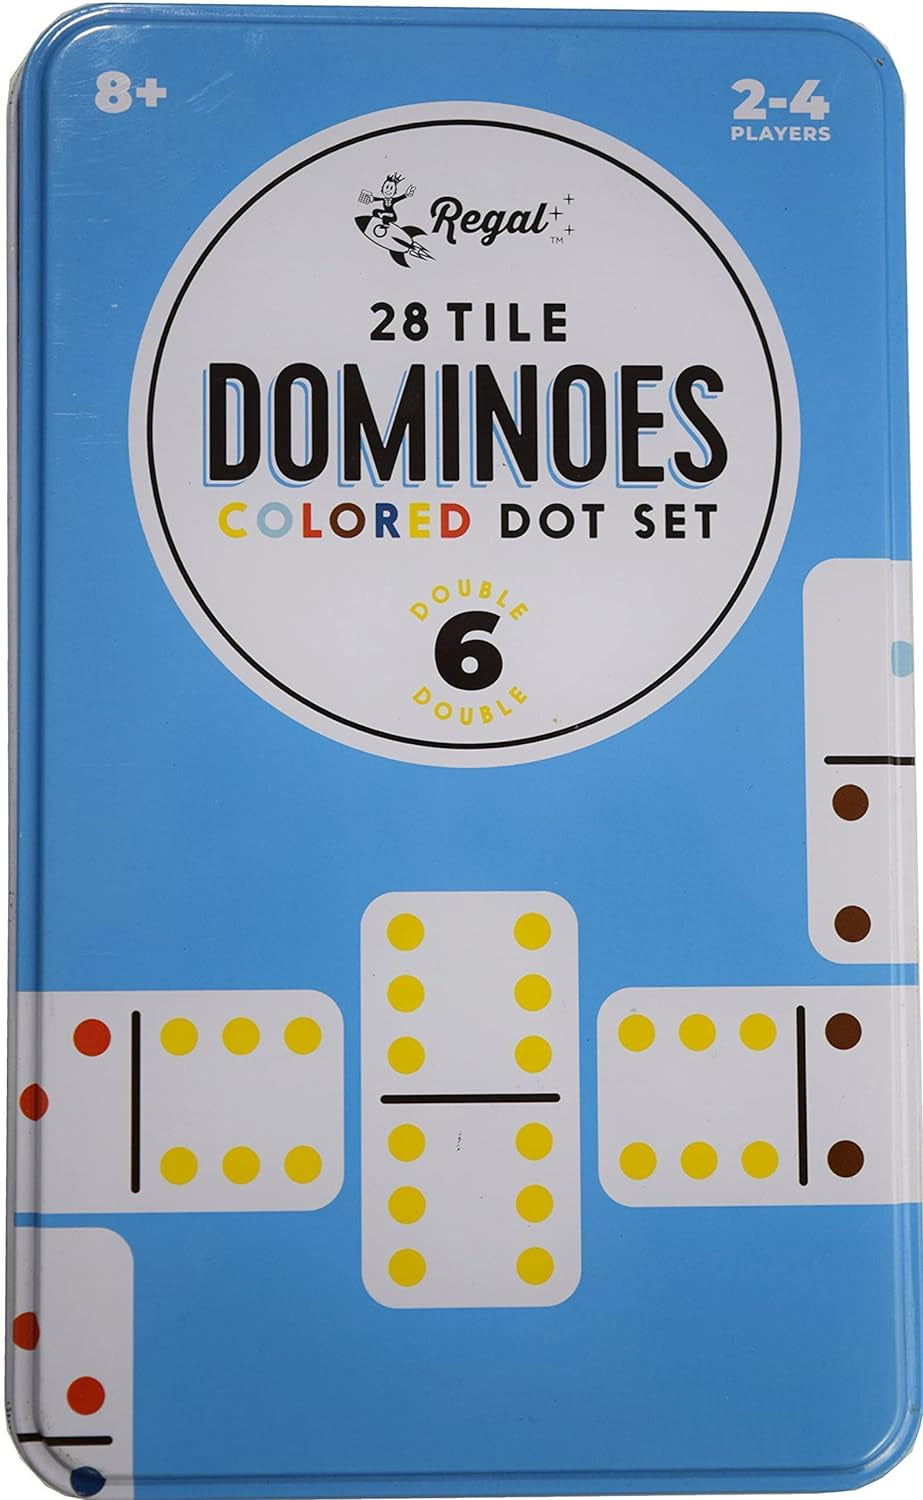 - Double 6 Dominoes - Colored Dots Set - Fun Family-Friendly Game - Includes 28 Tiles & Collector’S Tin - Ideal for 2-4 Players Ages 8 for Kids and Adults